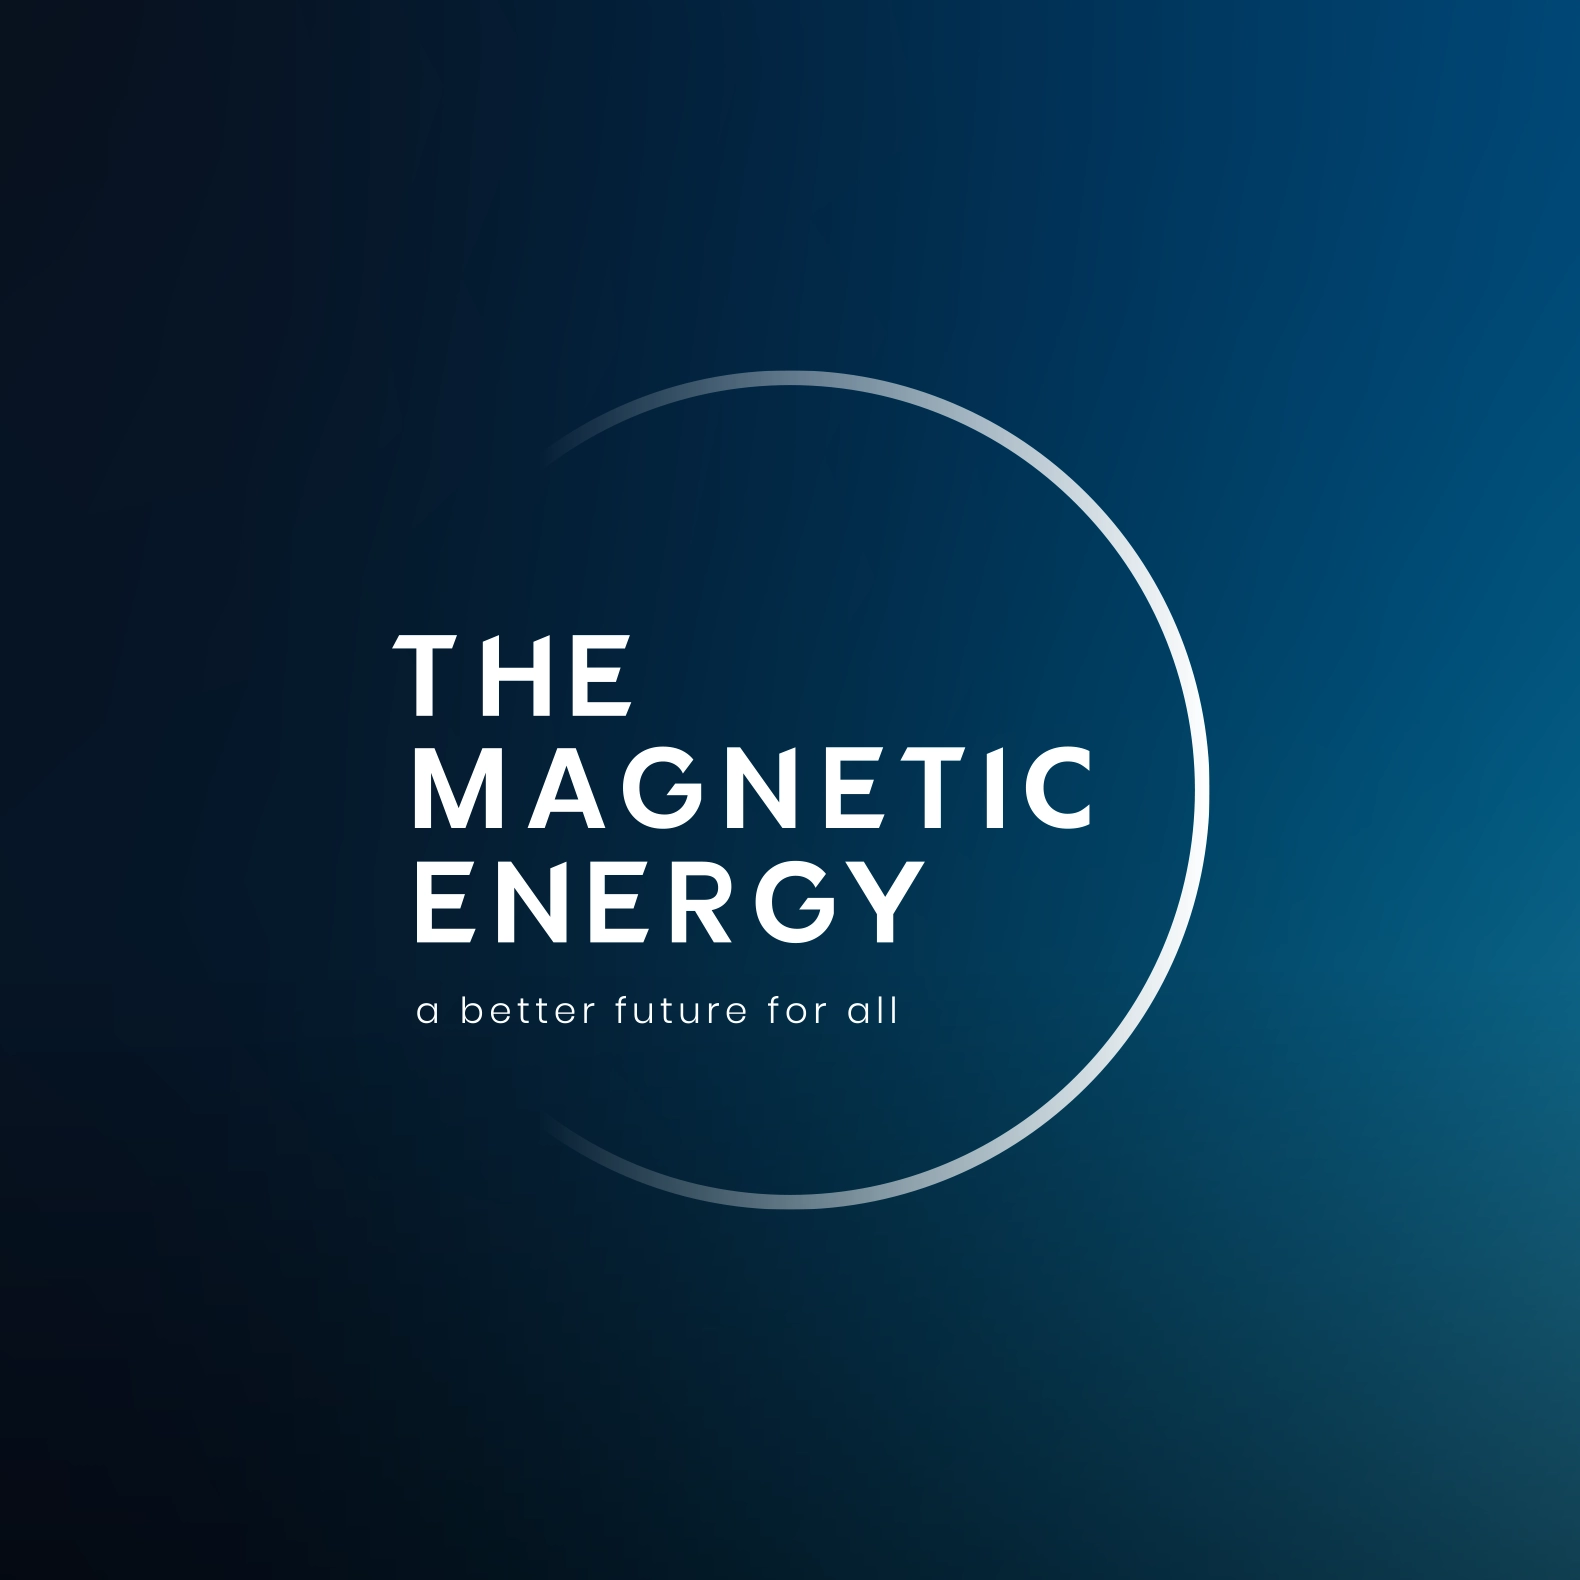 The Magnetic Energy: Startup Leader in innovation and technology that strives to improve the world through magnetic energy and science.